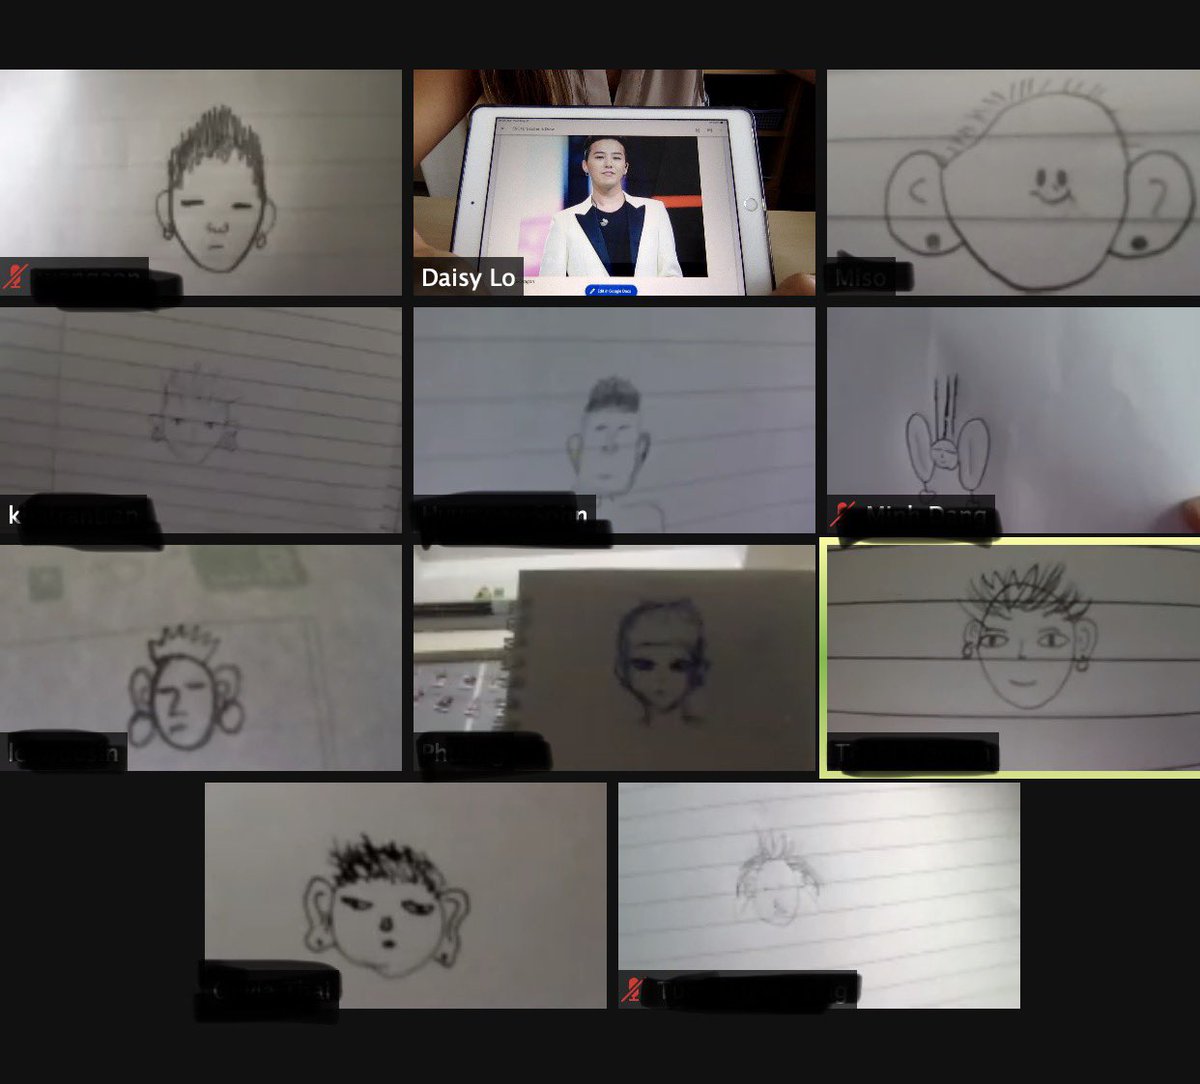 MS Mandarin A class is drawing the features according to the clues given by the teacher over Zoom during Virtual School. This is the revealing time. GD and Cameron Diaz! #ssis #ssisworldlanguages https://t.co/TULefBjtbo